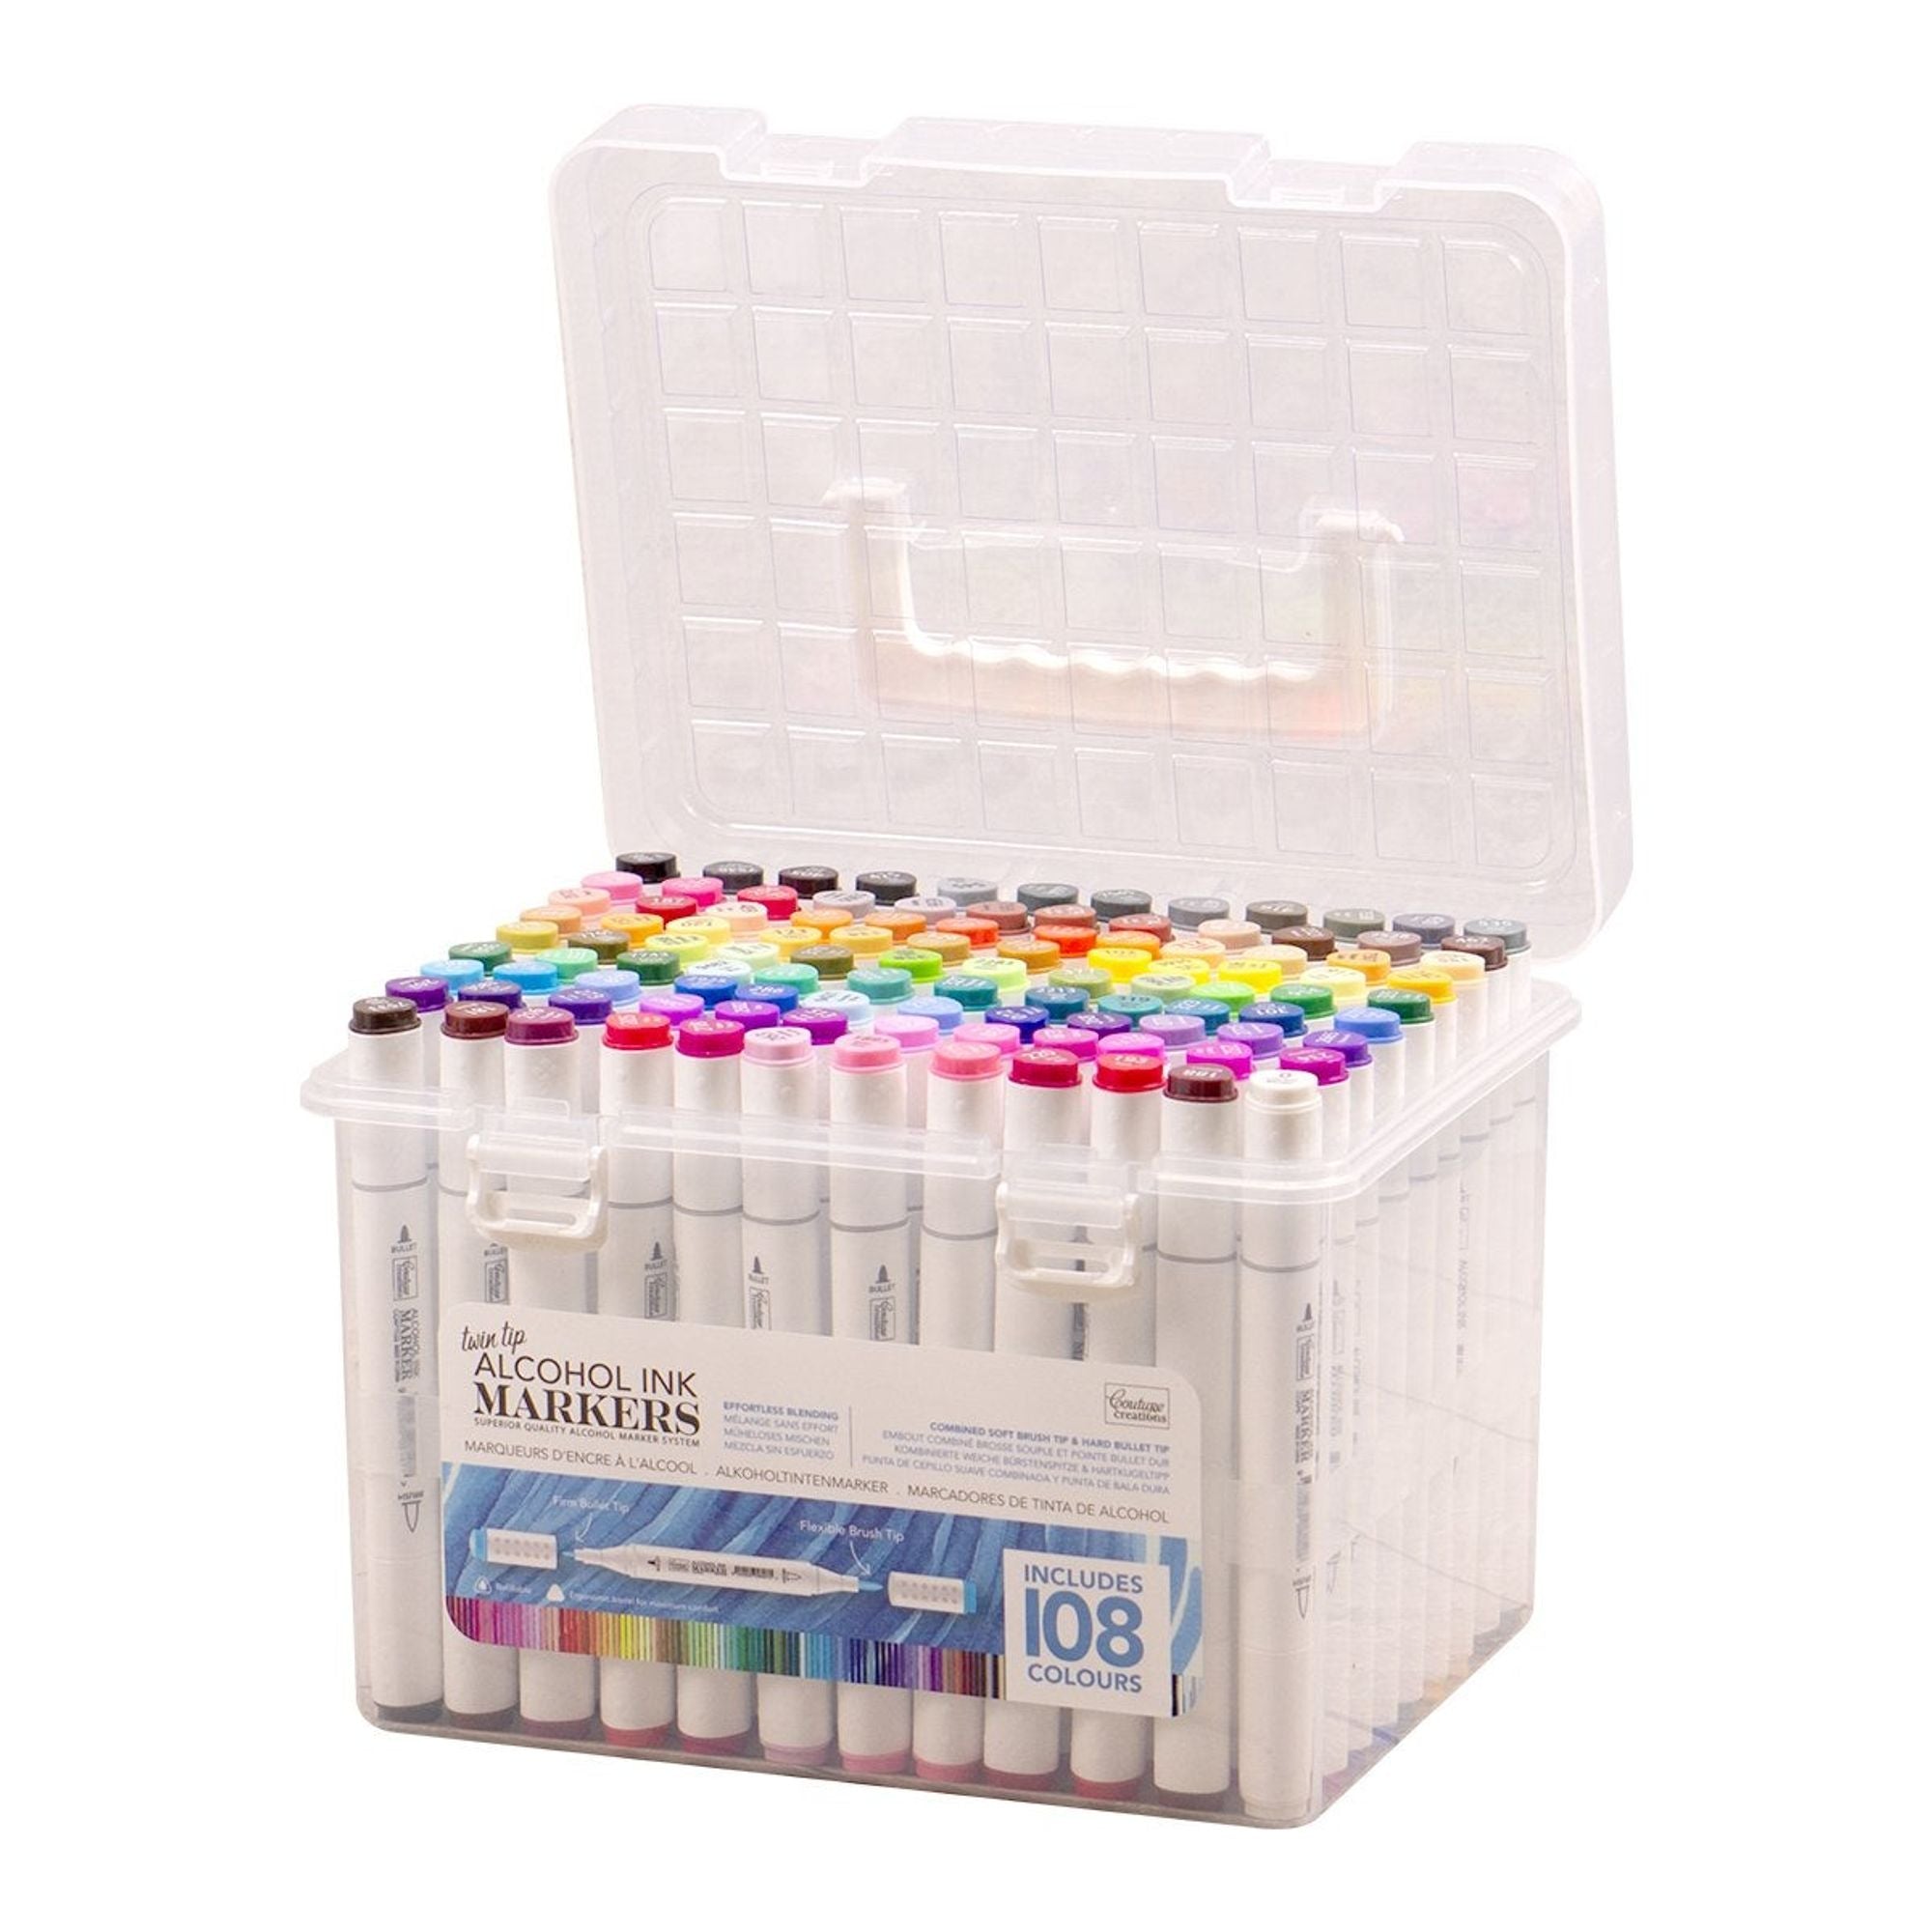 CHEAP ALCOHOL MARKERS FROM  //WEISBRANDT ARE THEY WORTH THE $17 ? 